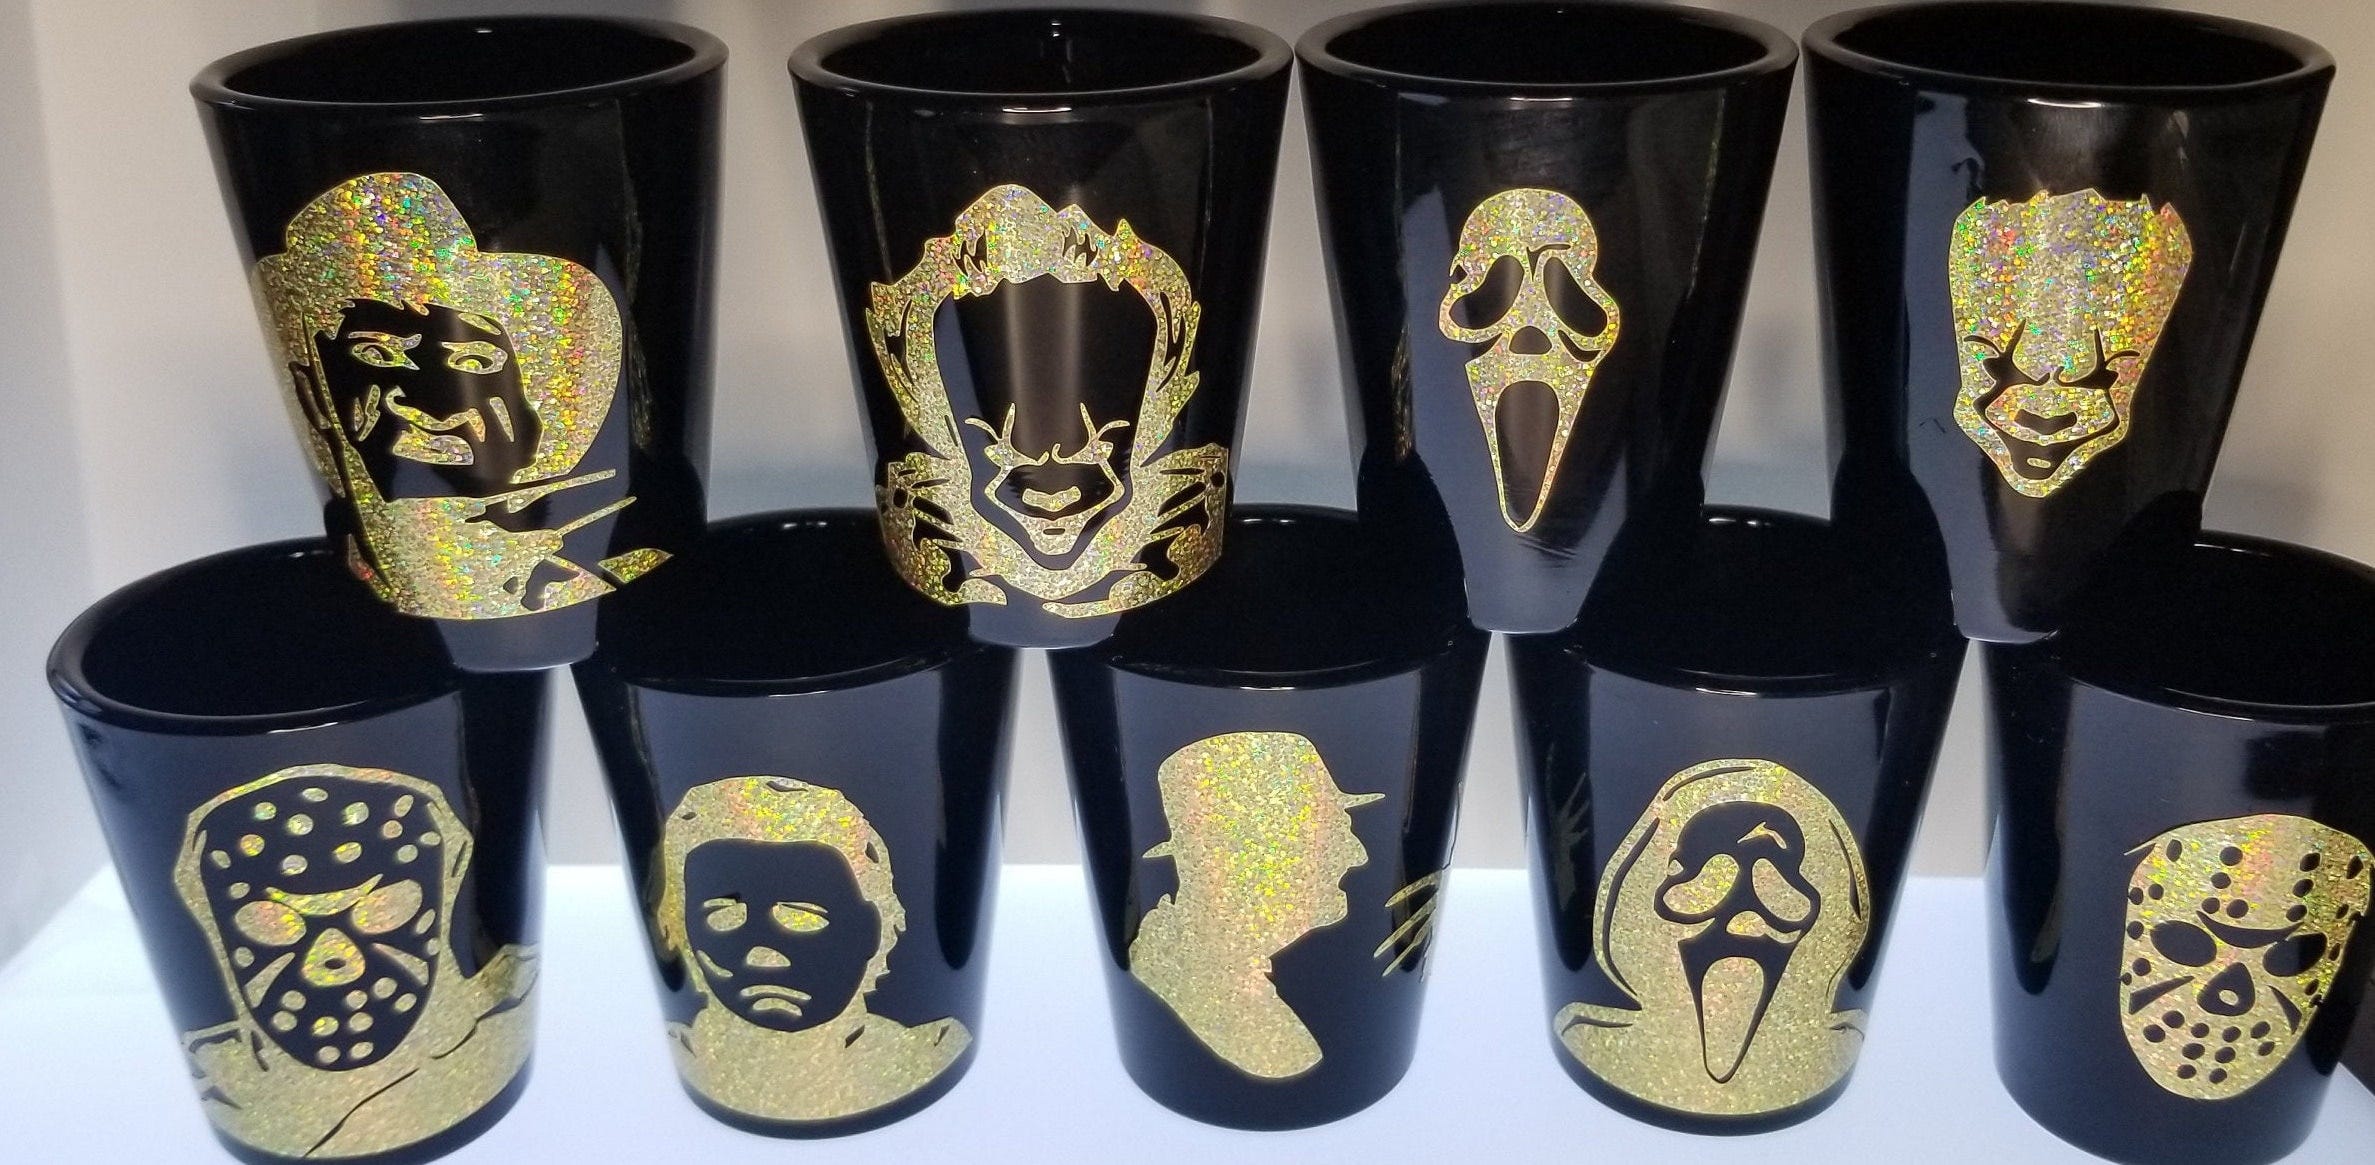 Horror shot glasses | Spooky movie shots | Halloween party drinks | scary movie gifts